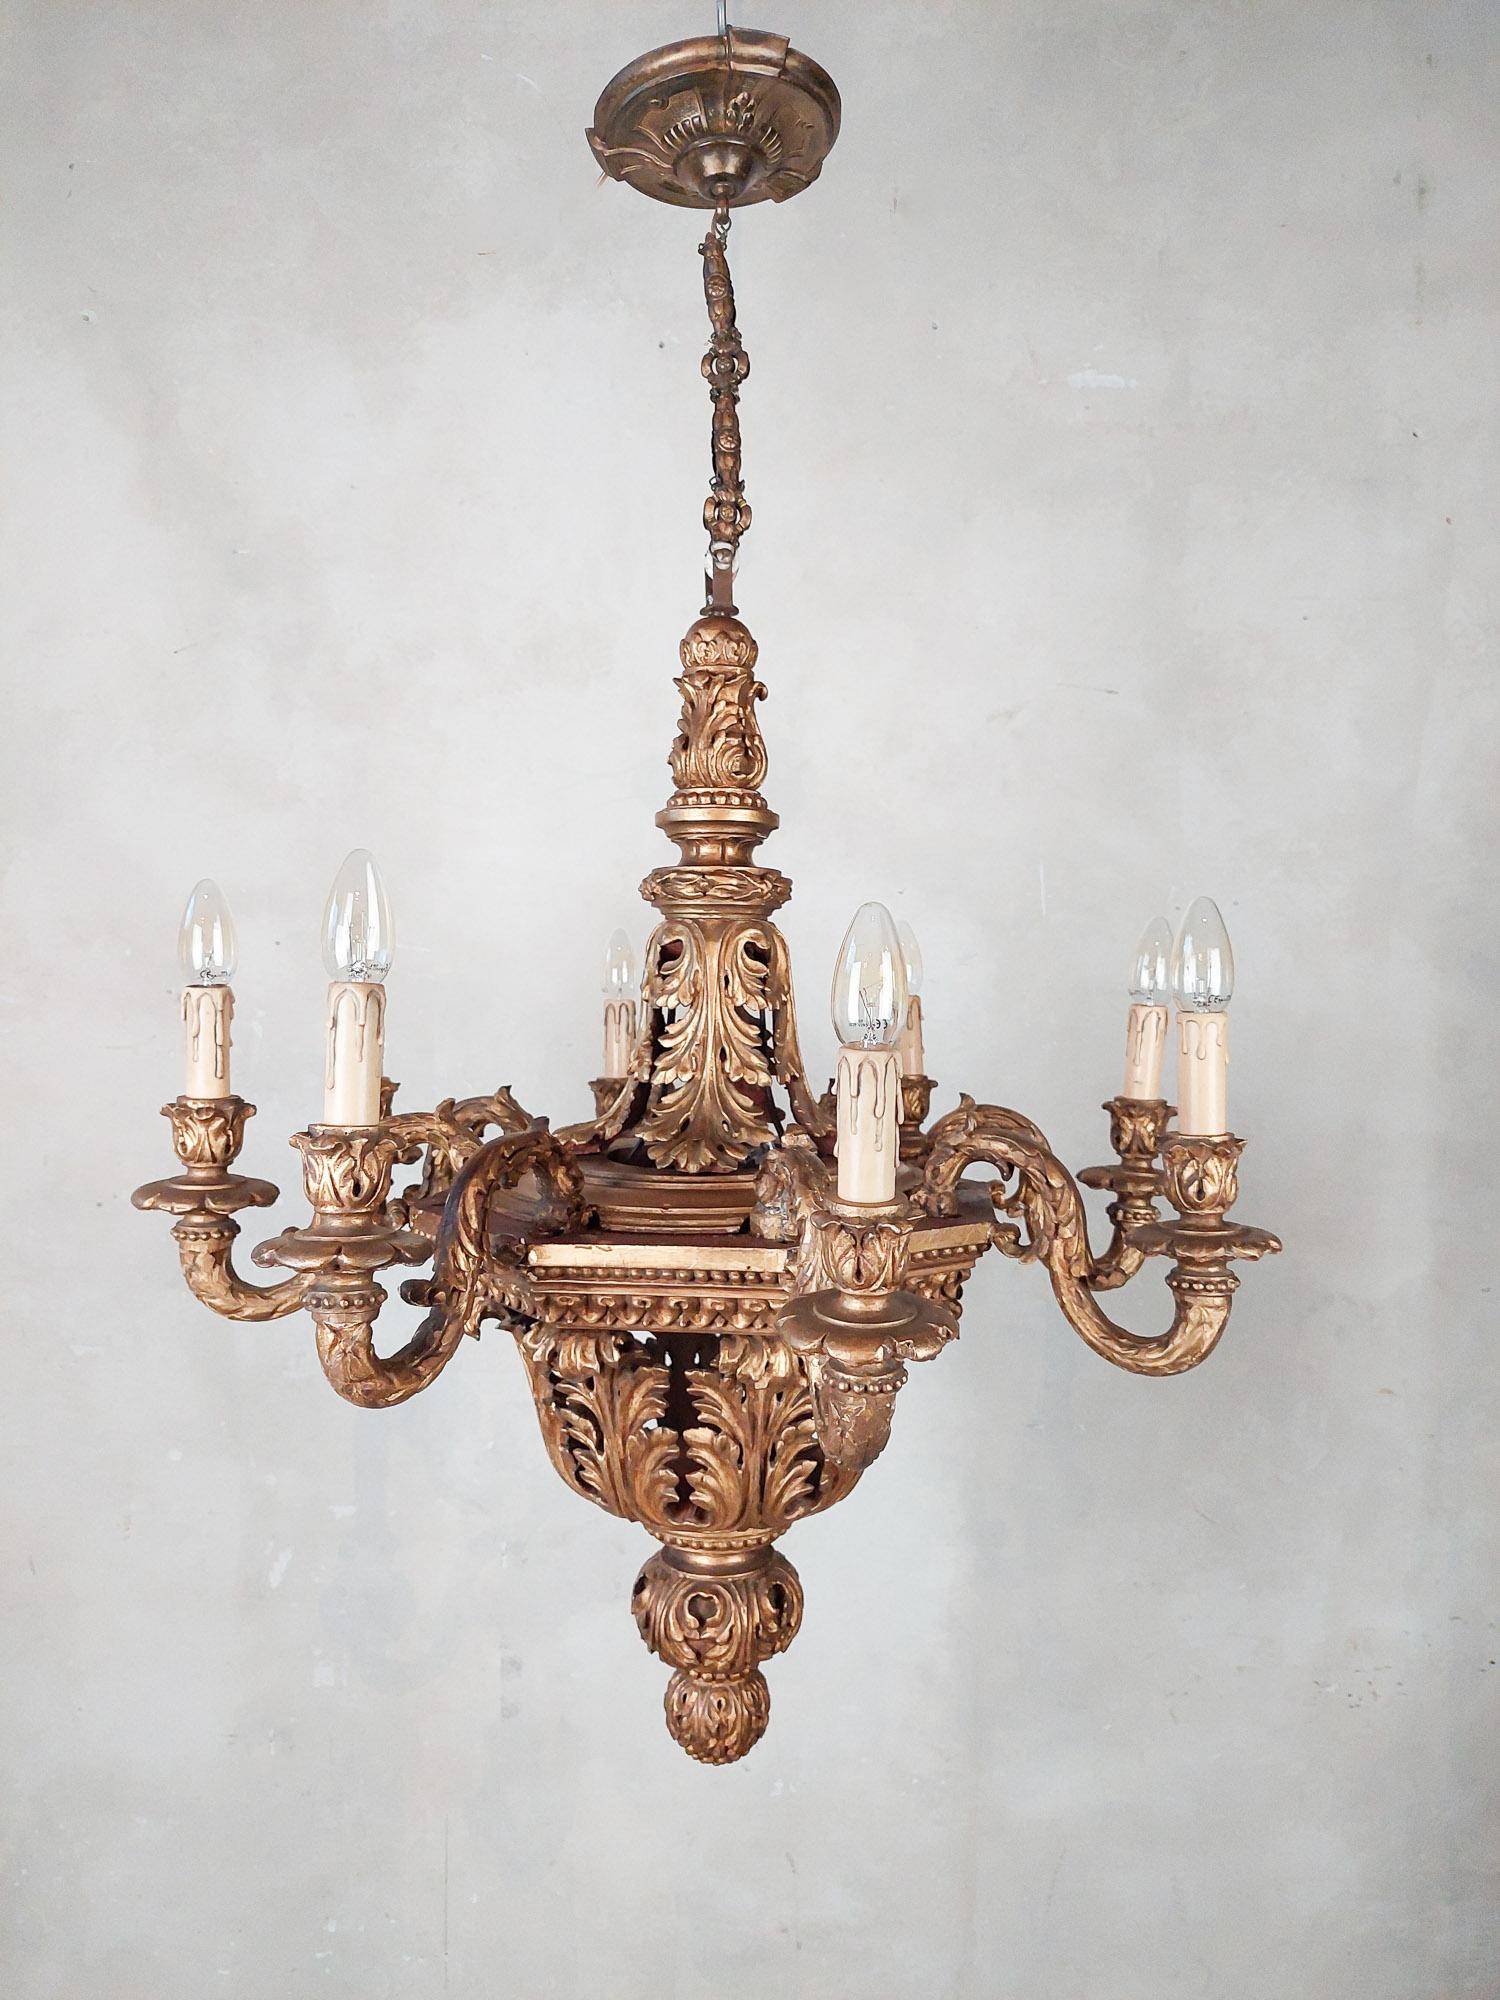 Antique Italian carved wooden chandelier. Completely made of carved wood!
Incredible fine and detailed carving, the acanthus leafs separated, creating a see through effect, finished with gold leaf patina, hanging from a brass chain and ceiling